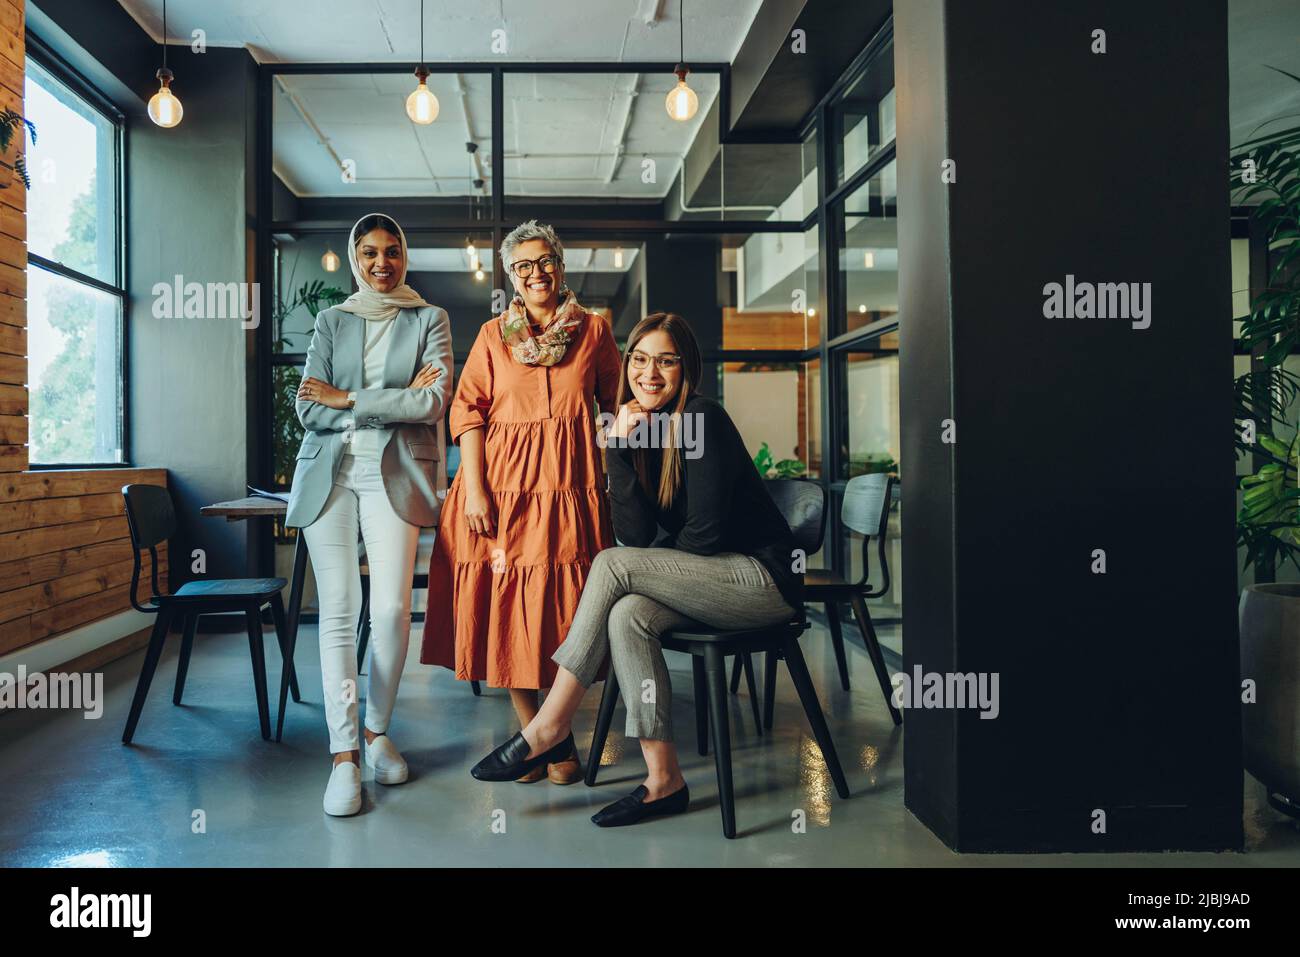 Multiethnic entrepreneurs smiling at the camera in a boardroom. Group of successful businesswomen working as a team in an inclusive workplace. Diverse Stock Photo